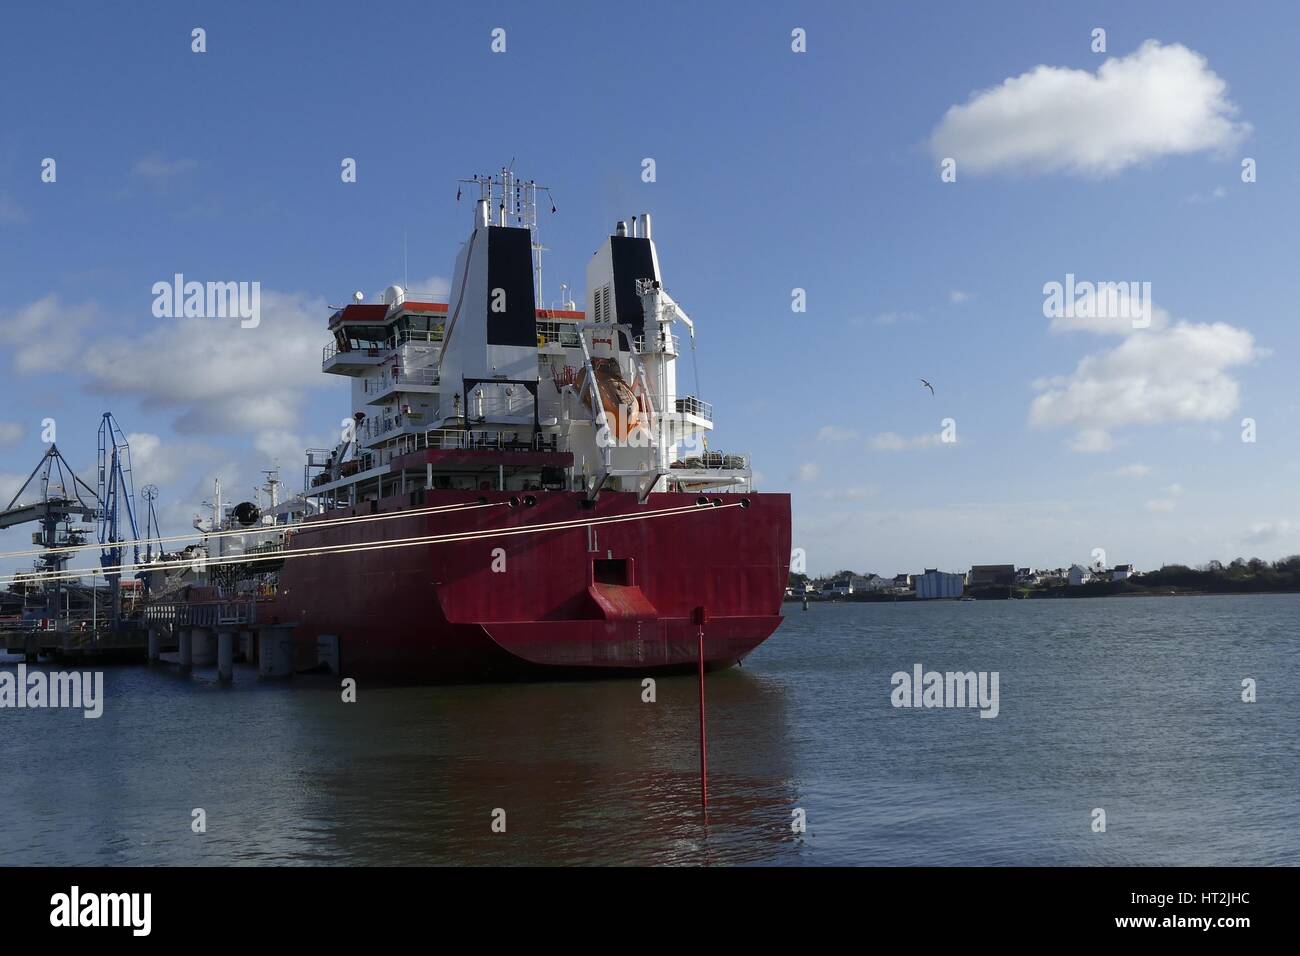 Products Tanker discharging at the Oil Terminal of Lorient, France, with red hull and white funnel on a sunny day. Stock Photo